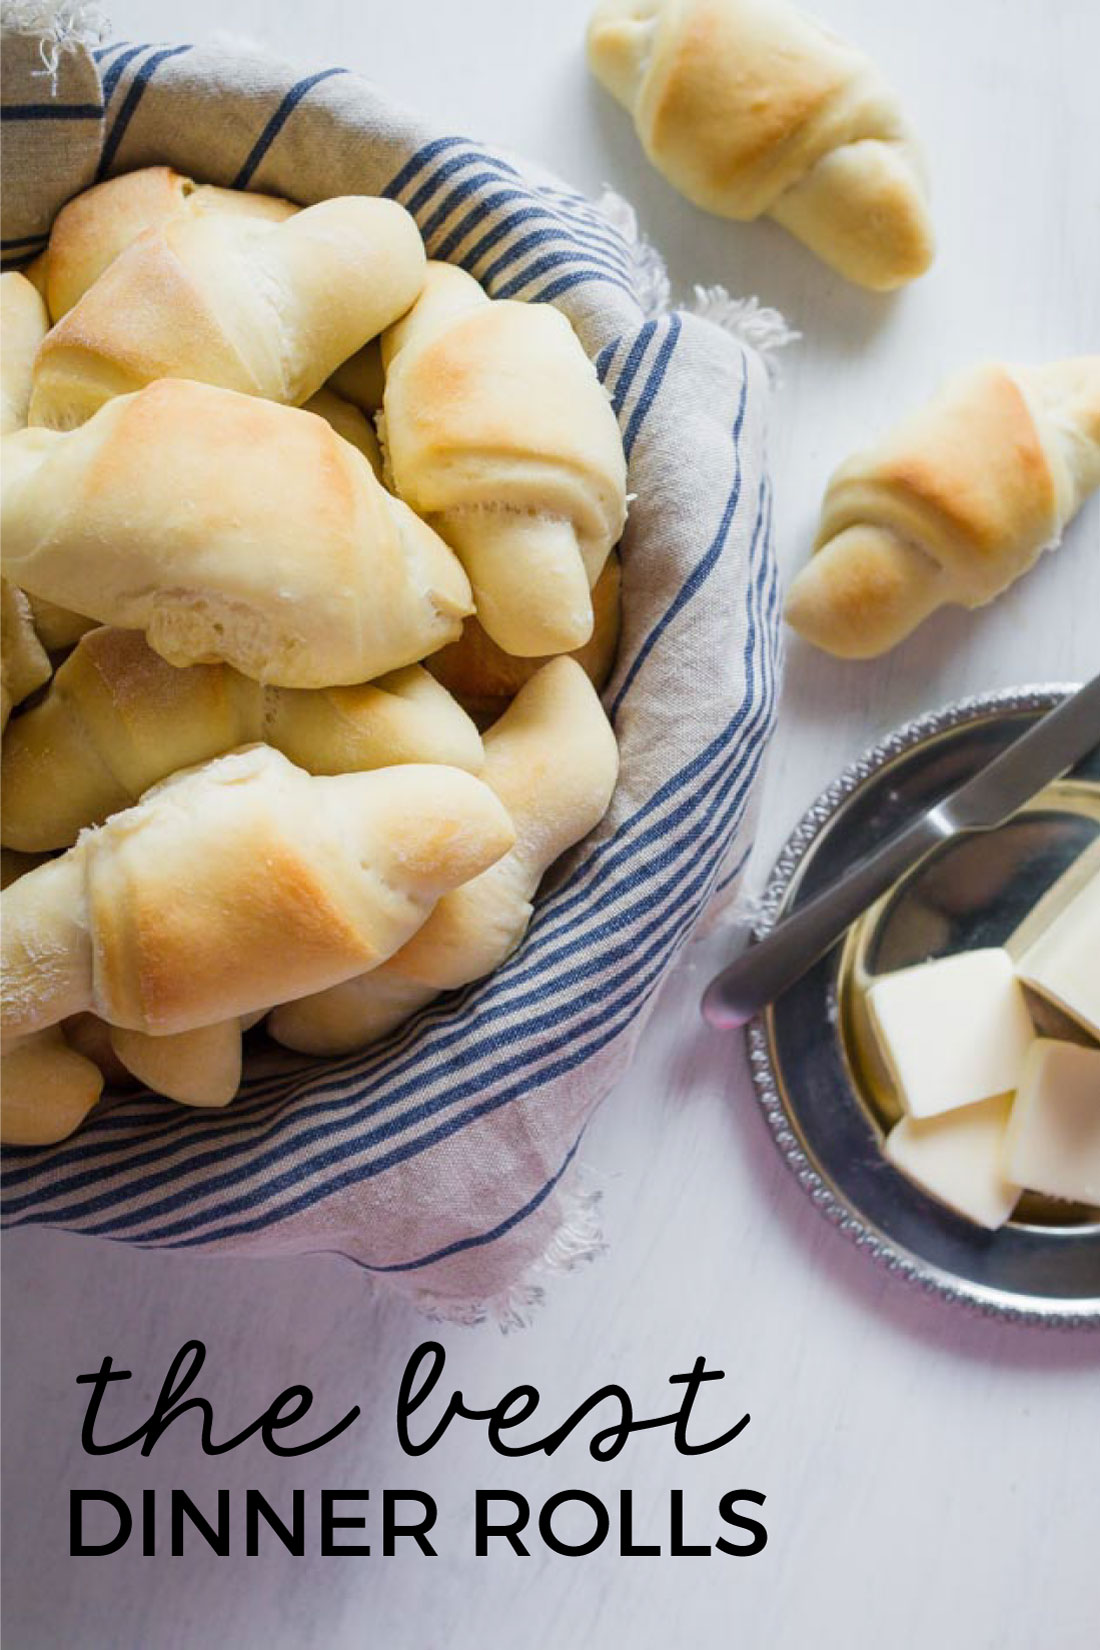 Food: The best dinner rolls - tasty, buttery, soft dinner rolls that will melt in your mouth. from www.thirtyhandmadedays.com